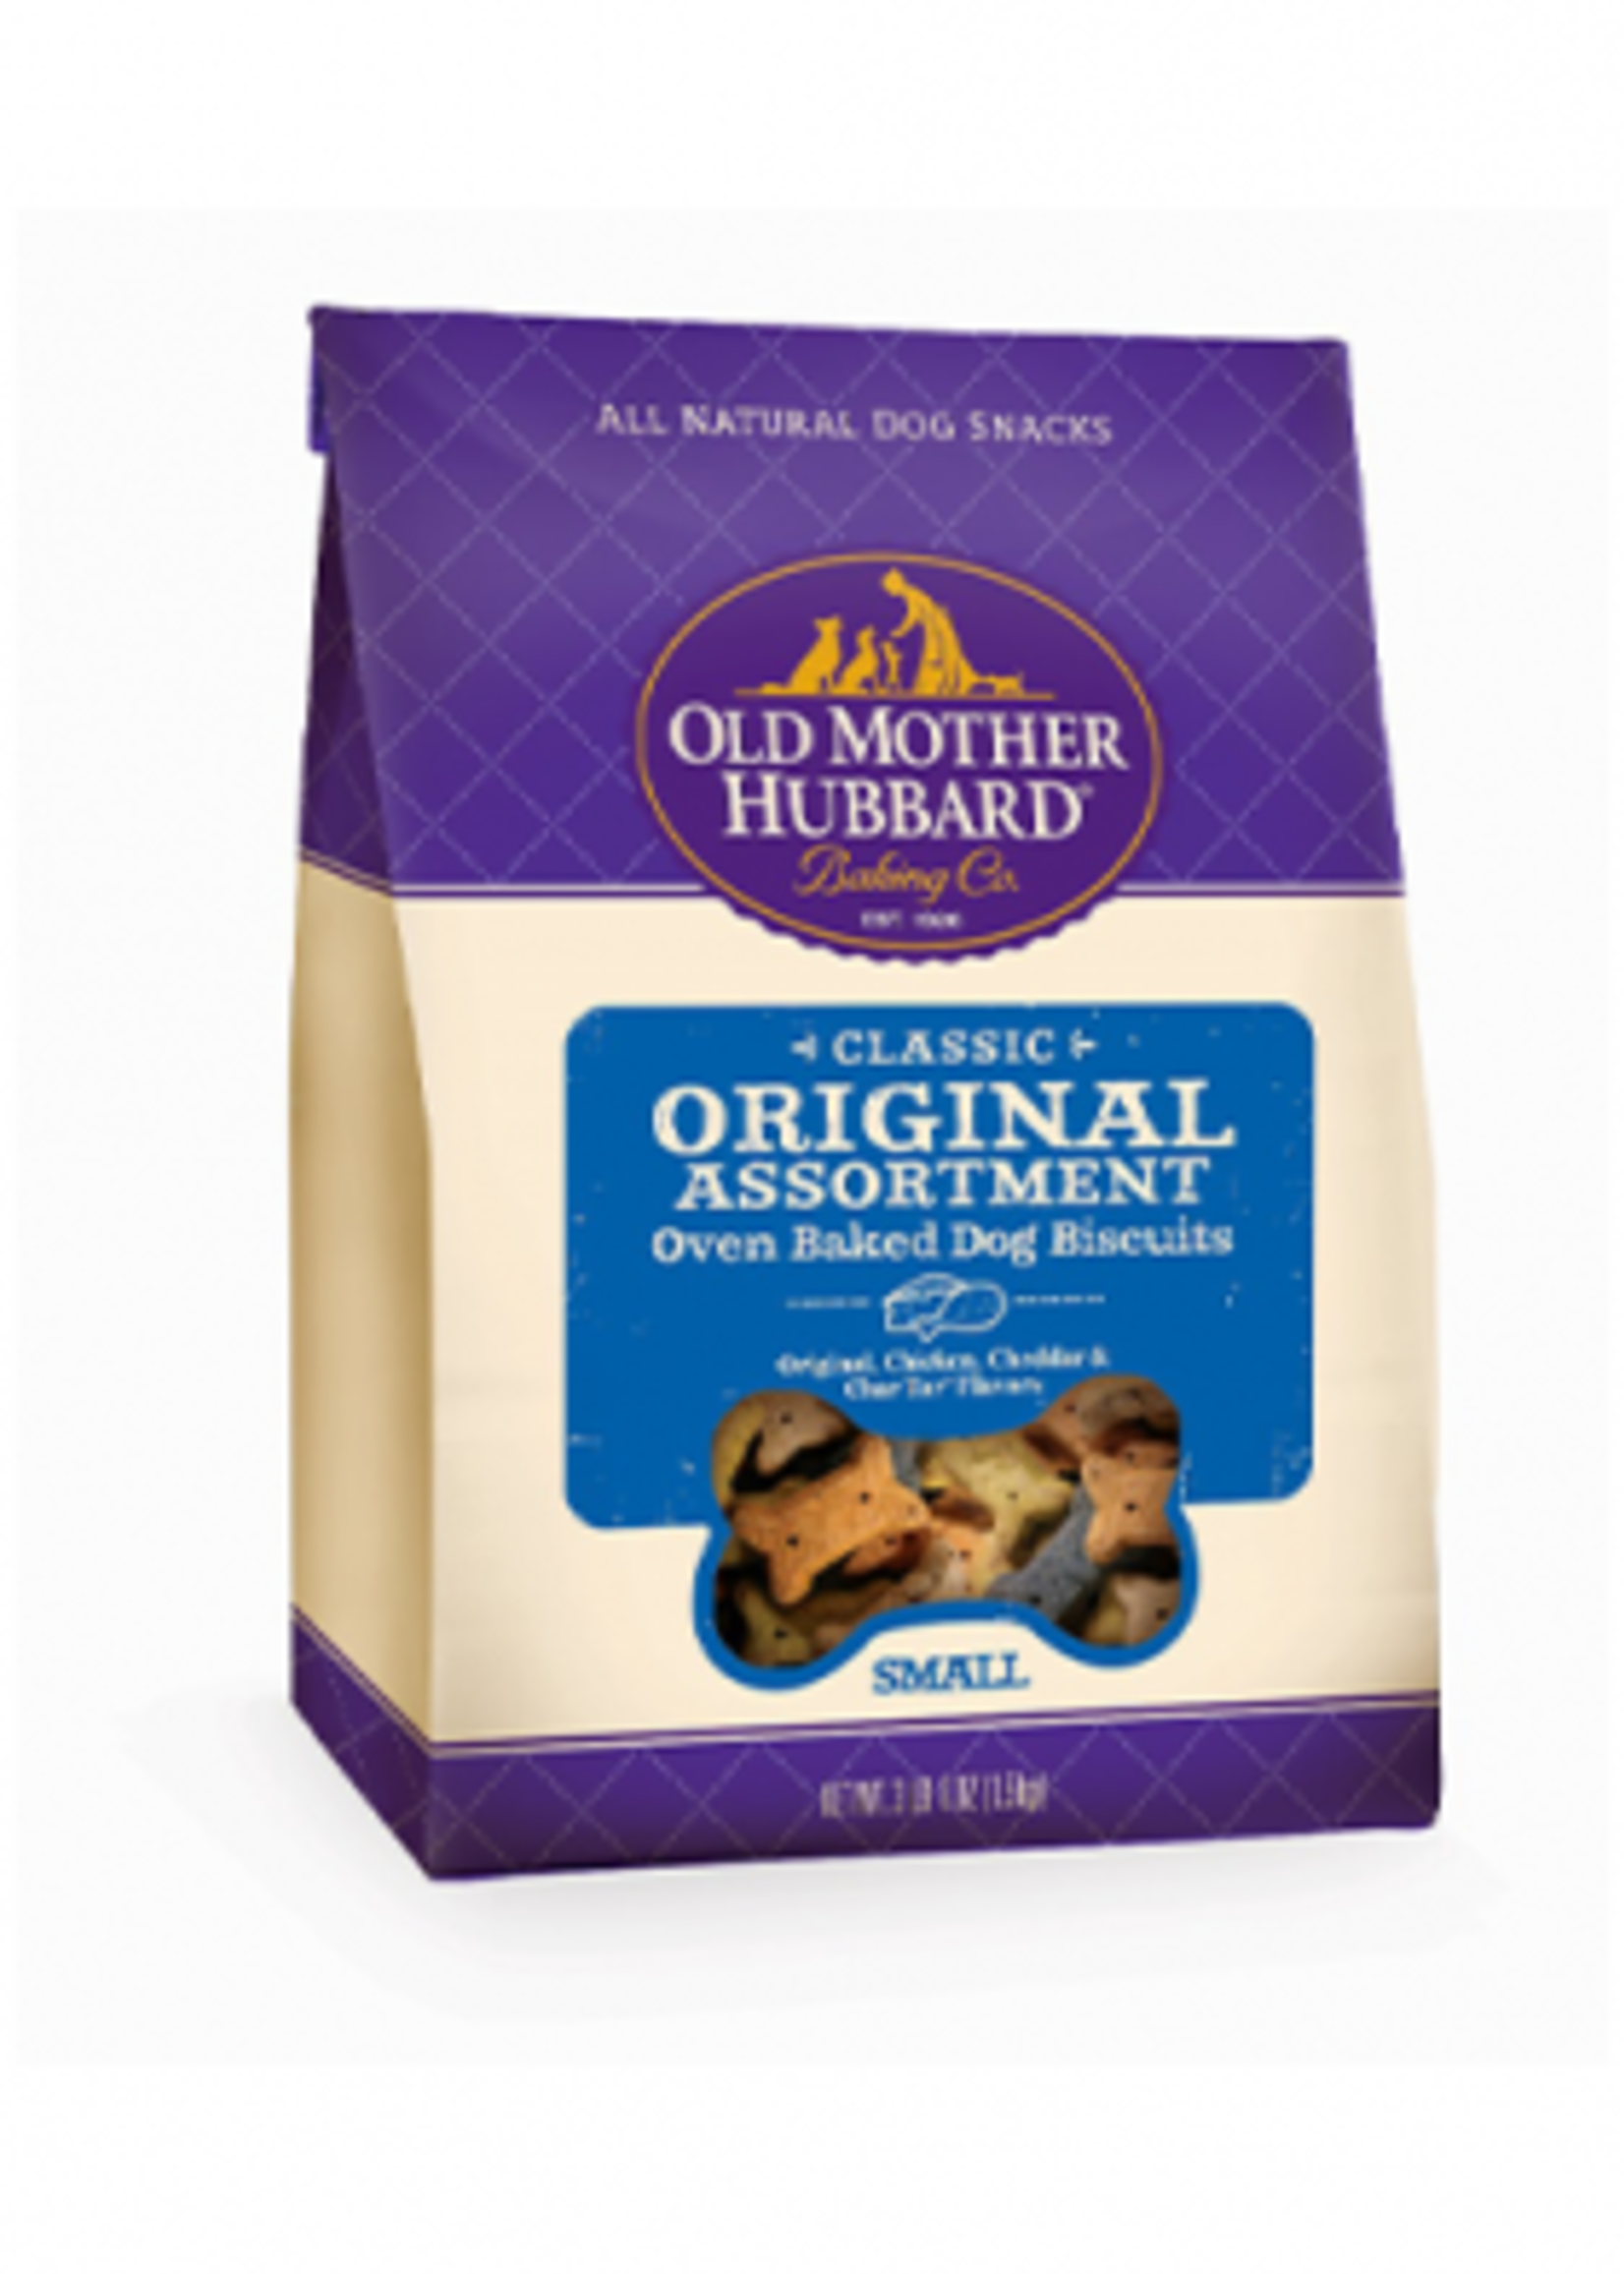 Old Mother Hubbard Old Mother Hubbard Original Small 3.8lbs